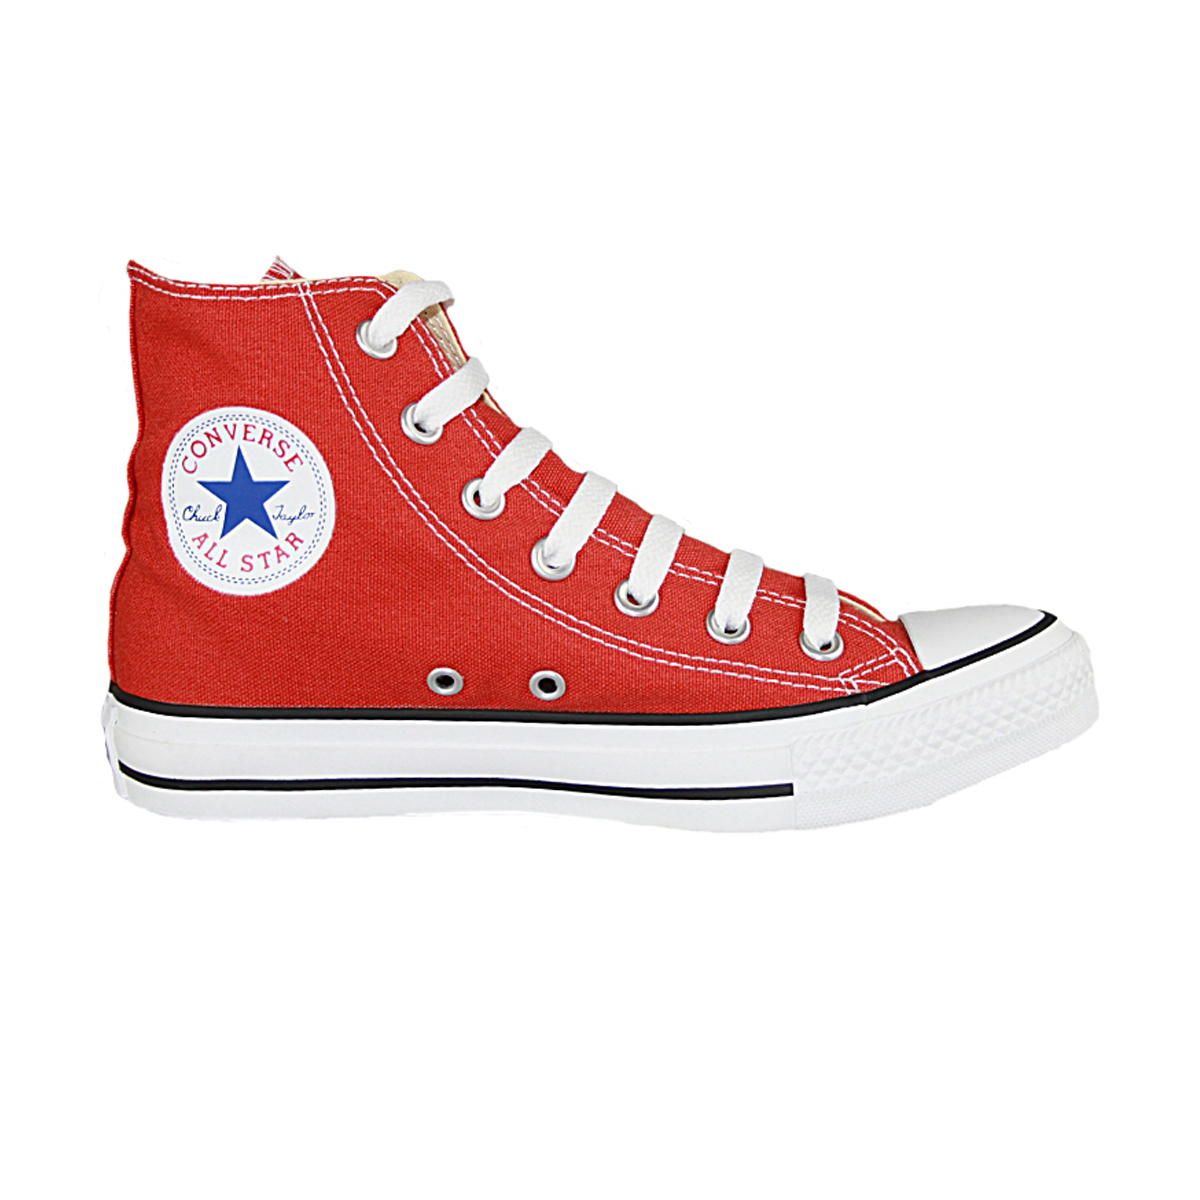 Converse trainers – for all types of sports activities